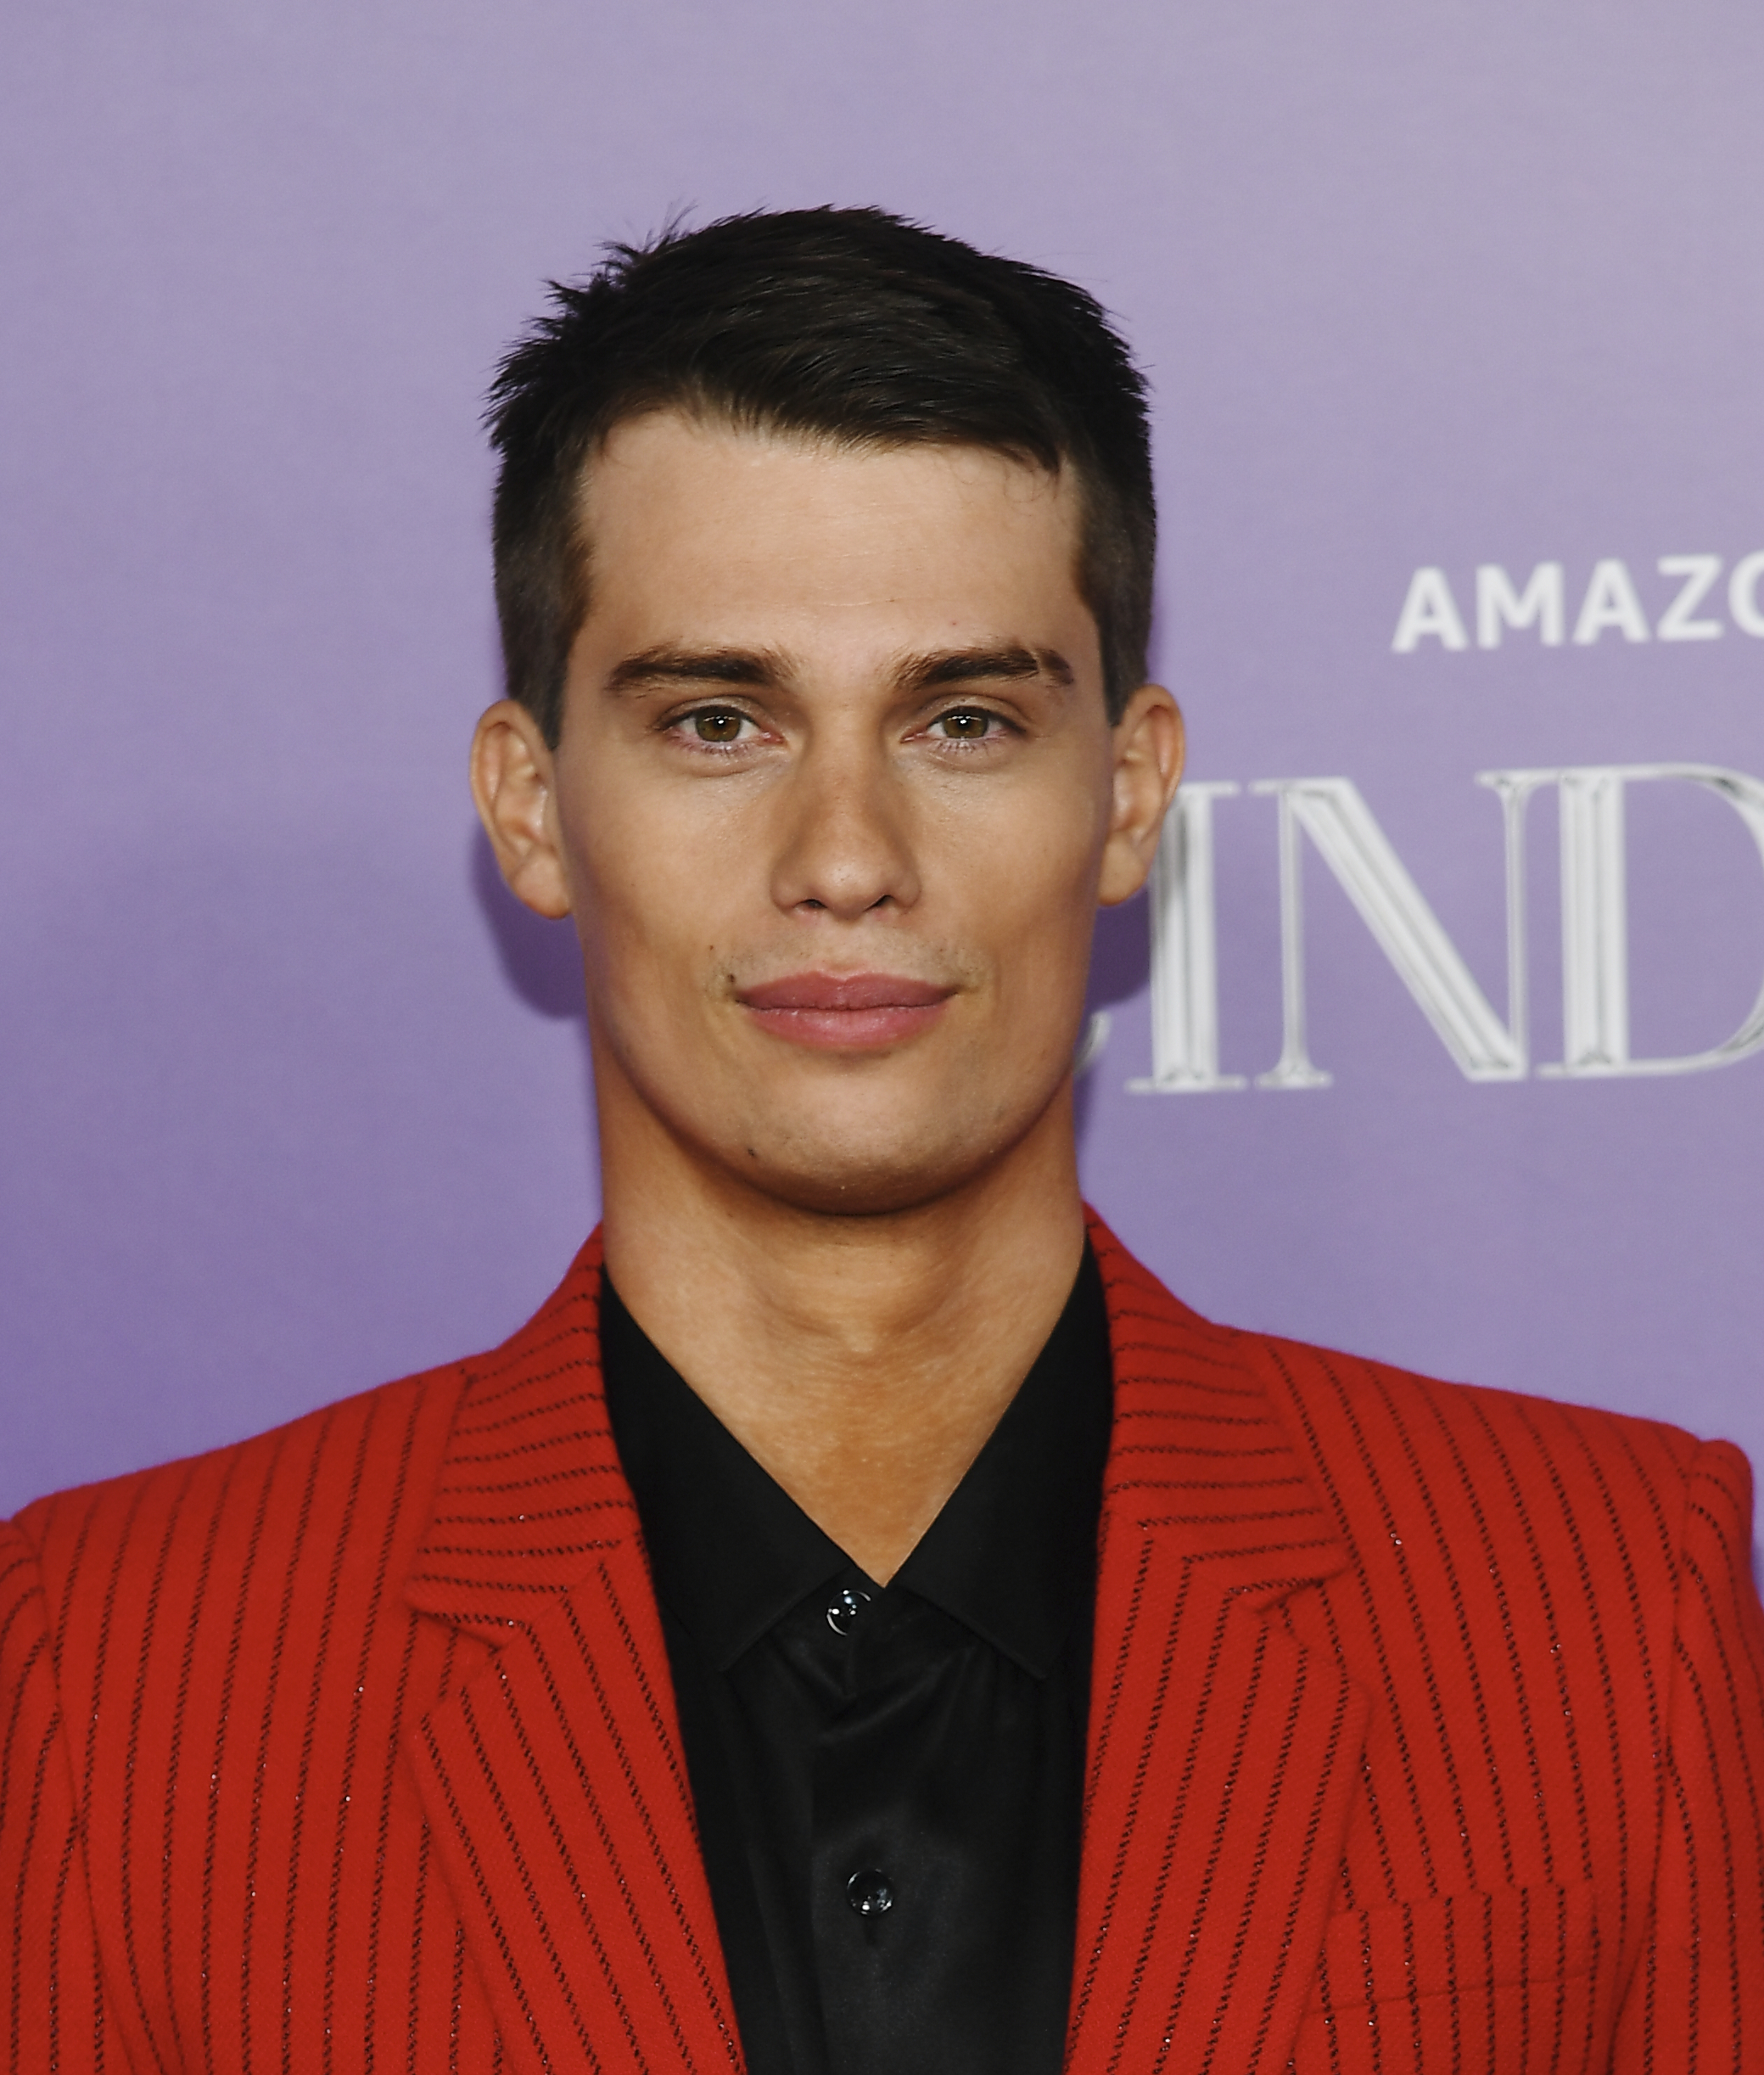 Nicholas Galitzine at the premiere of "Cinderella" on August 30 2021, in Los Angeles, California. | Source: Getty Images